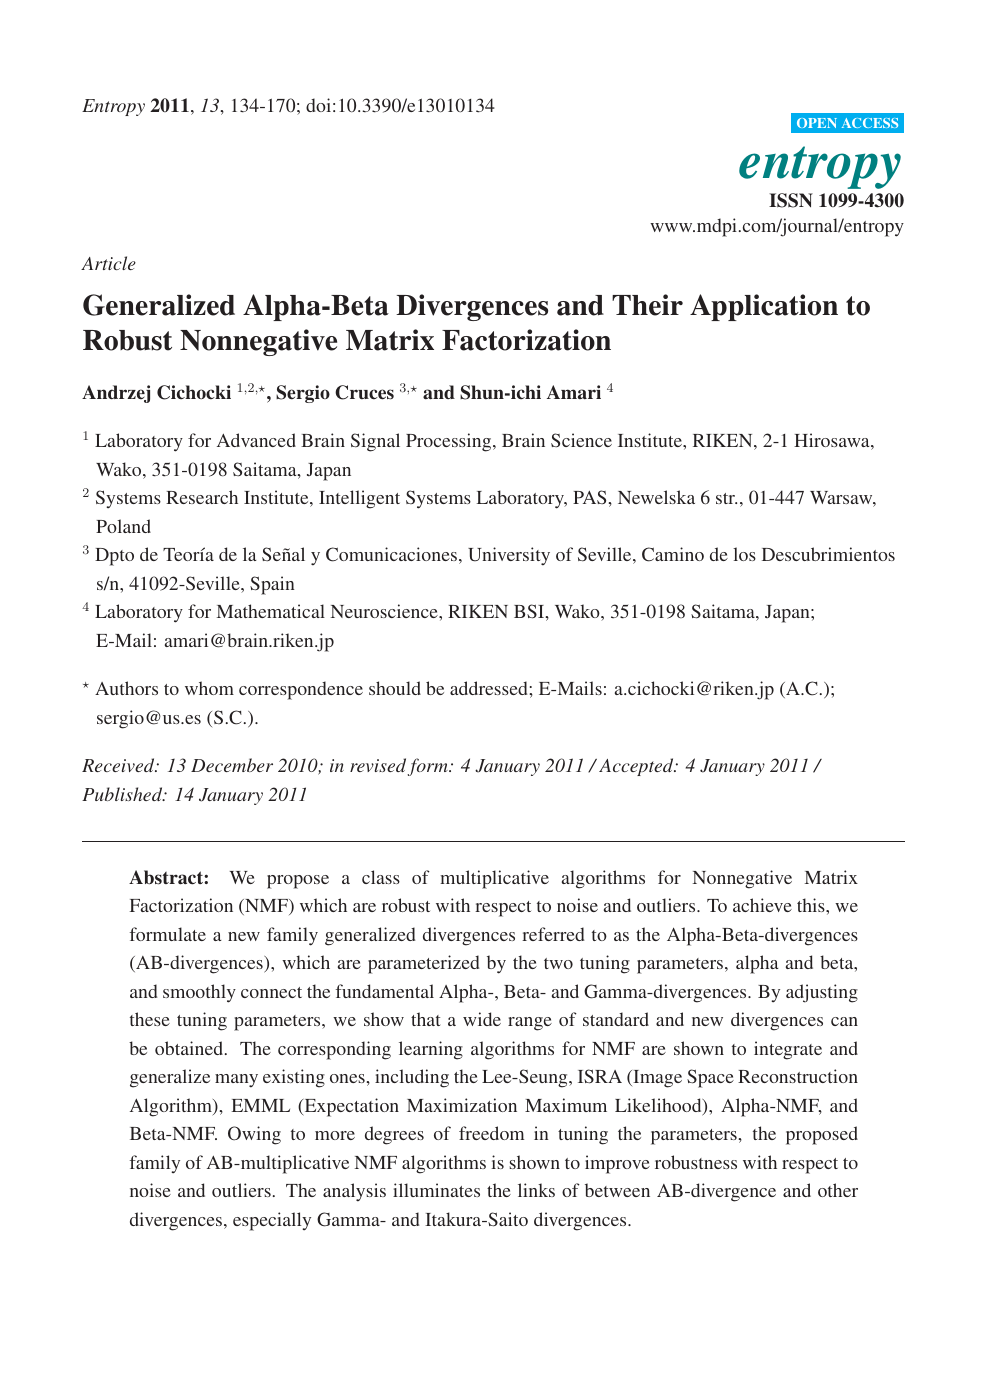 Generalized Alpha Beta Divergences And Their Application To Robust Nonnegative Matrix Factorization Topic Of Research Paper In Mathematics Download Scholarly Article Pdf And Read For Free On Cyberleninka Open Science Hub